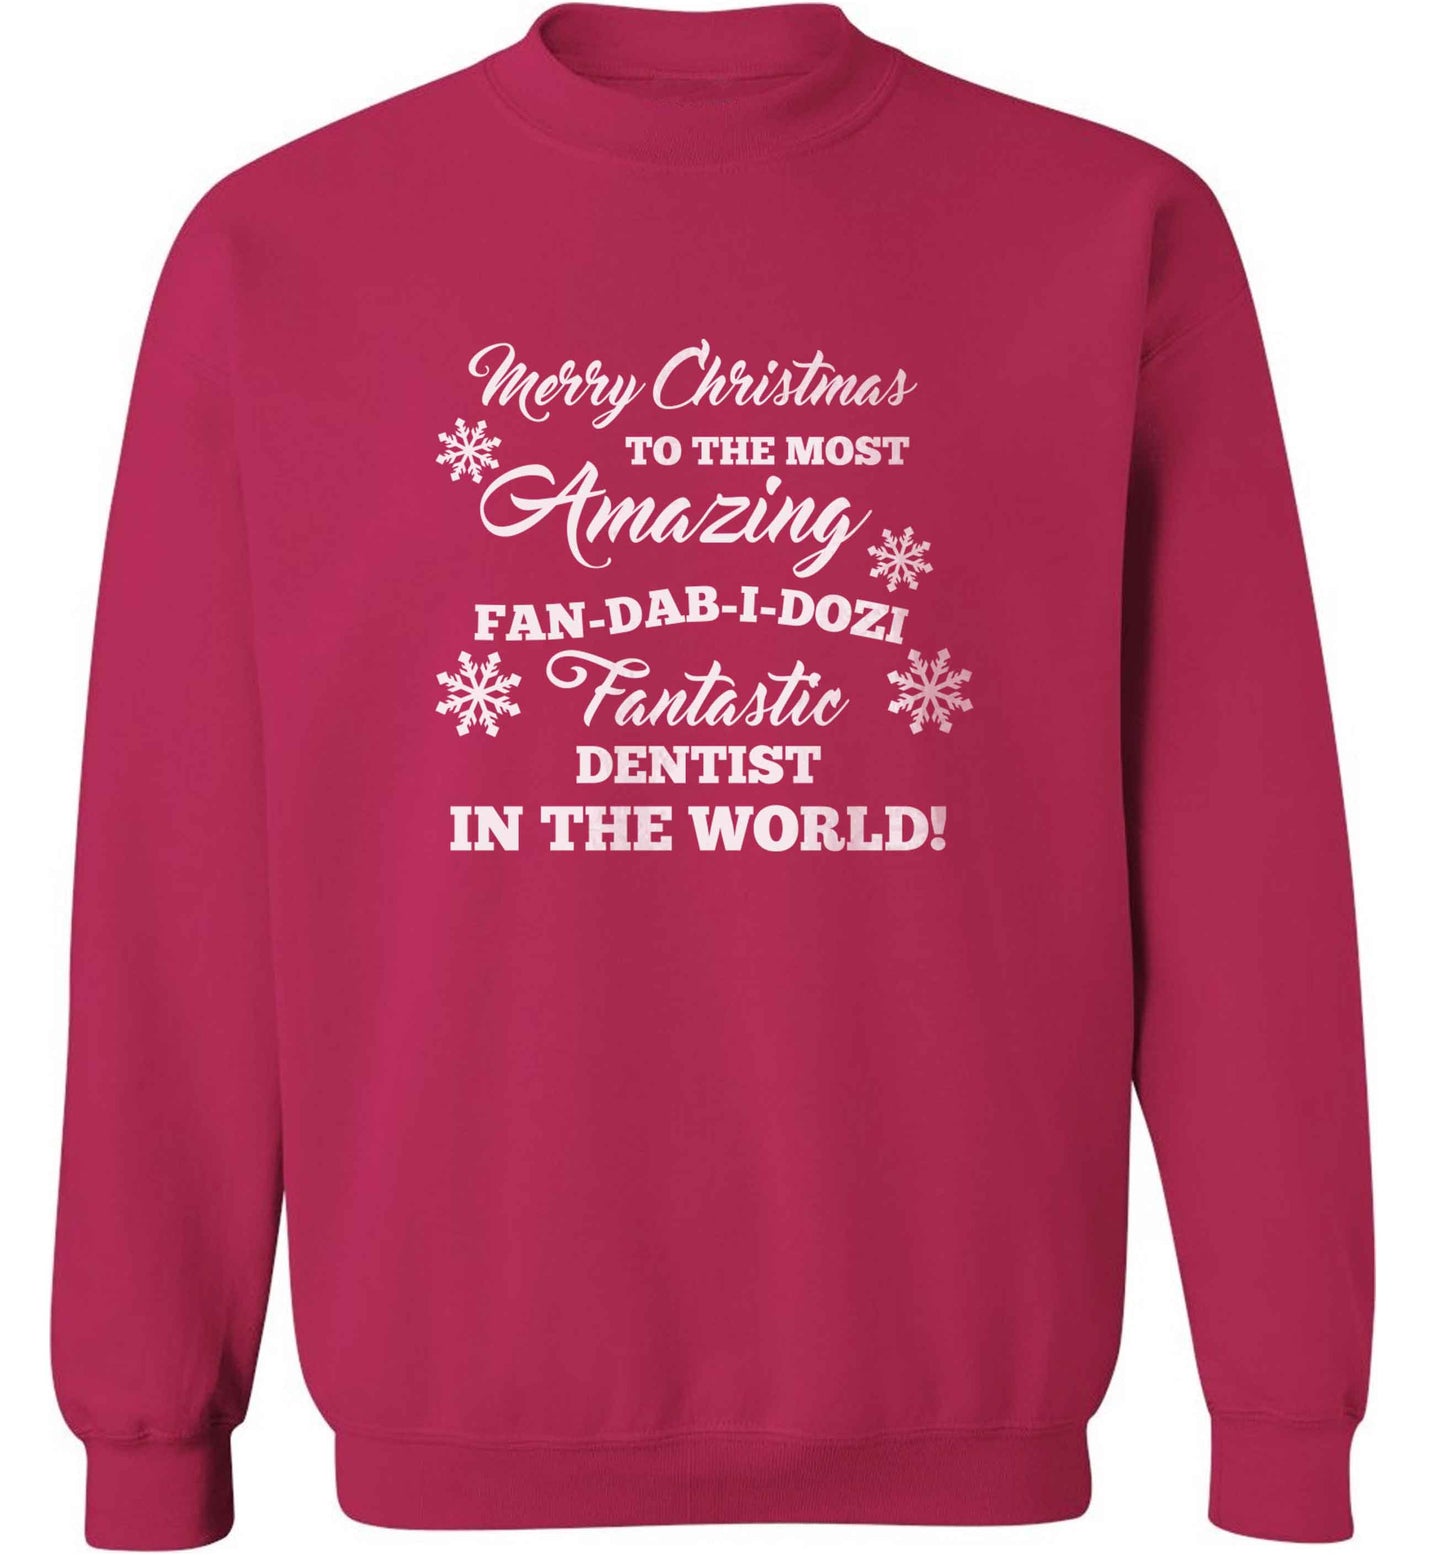 Merry Christmas to the most amazing dentist in the world! adult's unisex pink sweater 2XL